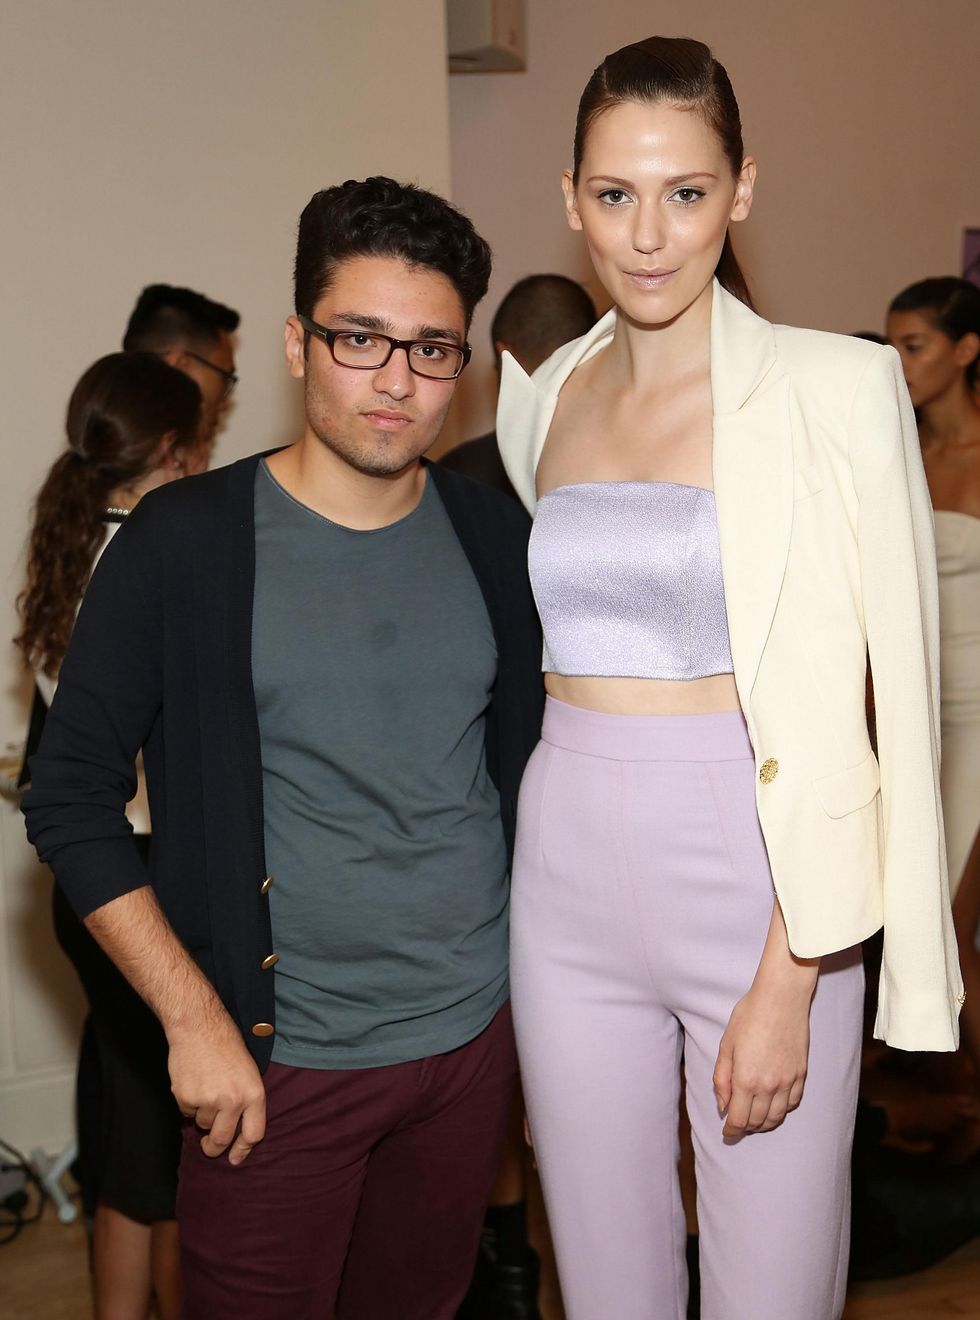 Amir Taghi and model backstage at New York runway show